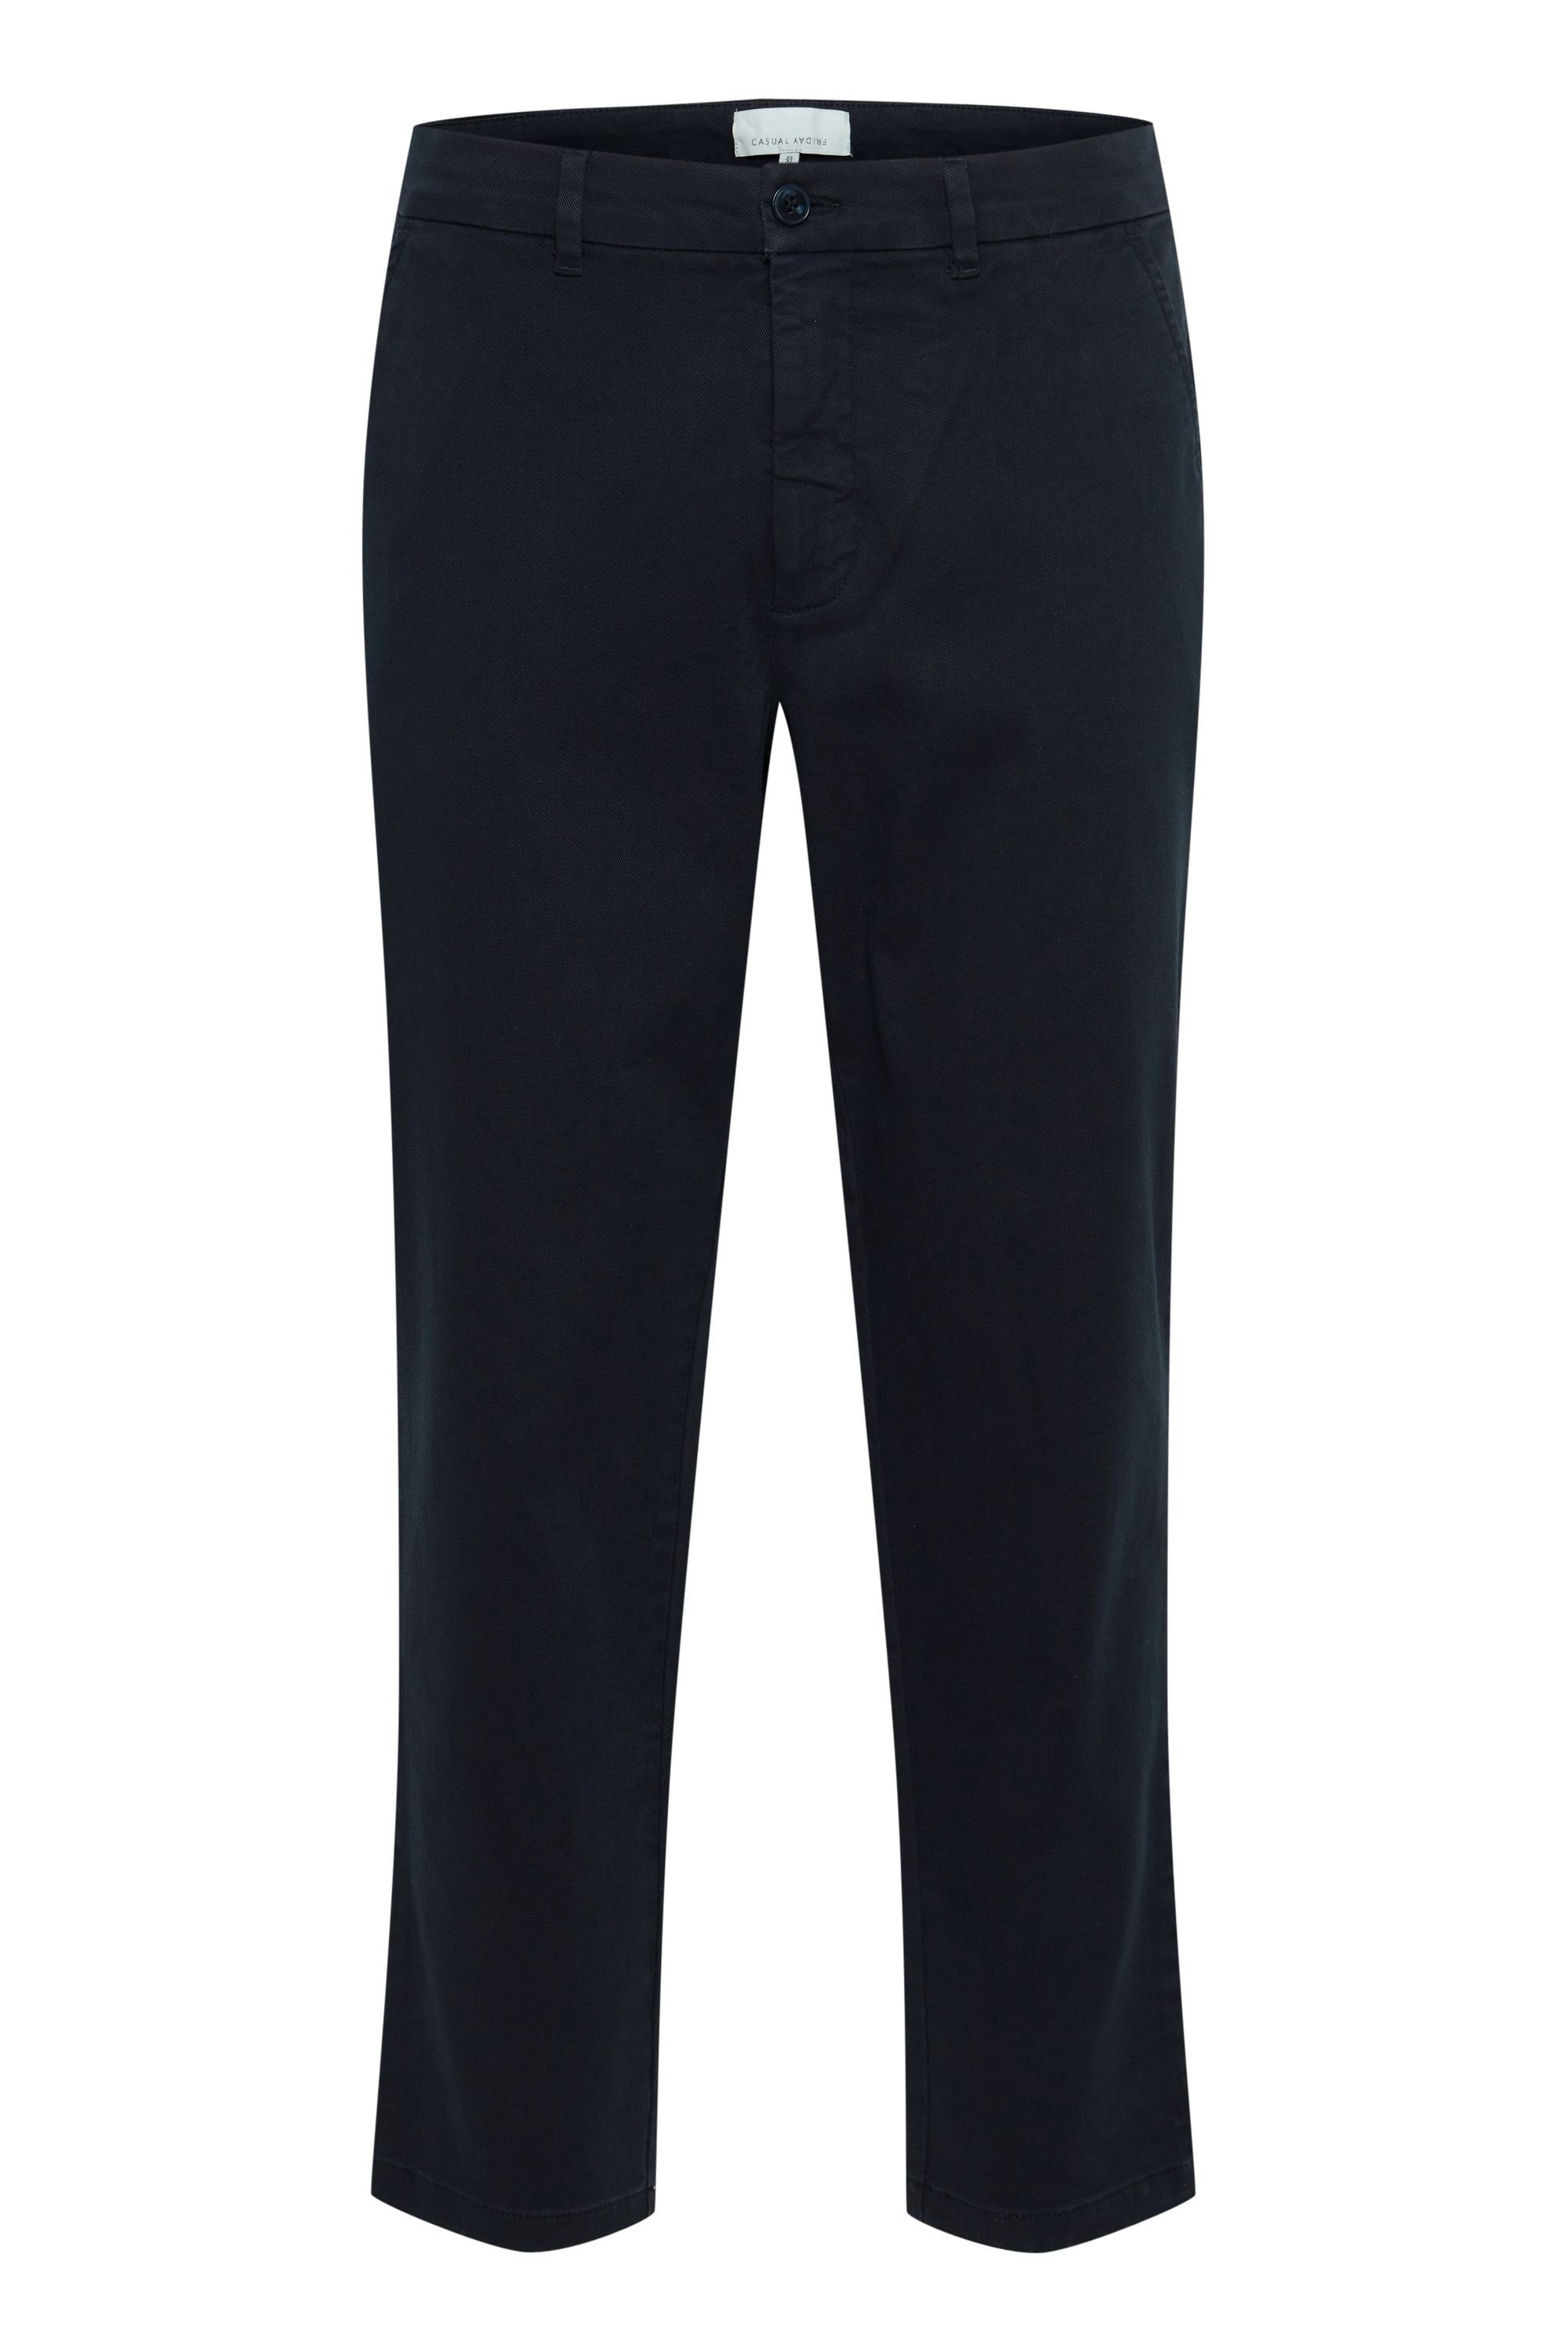 Casual Friday relaxed 20504412 Sweatjeans Pepe pants